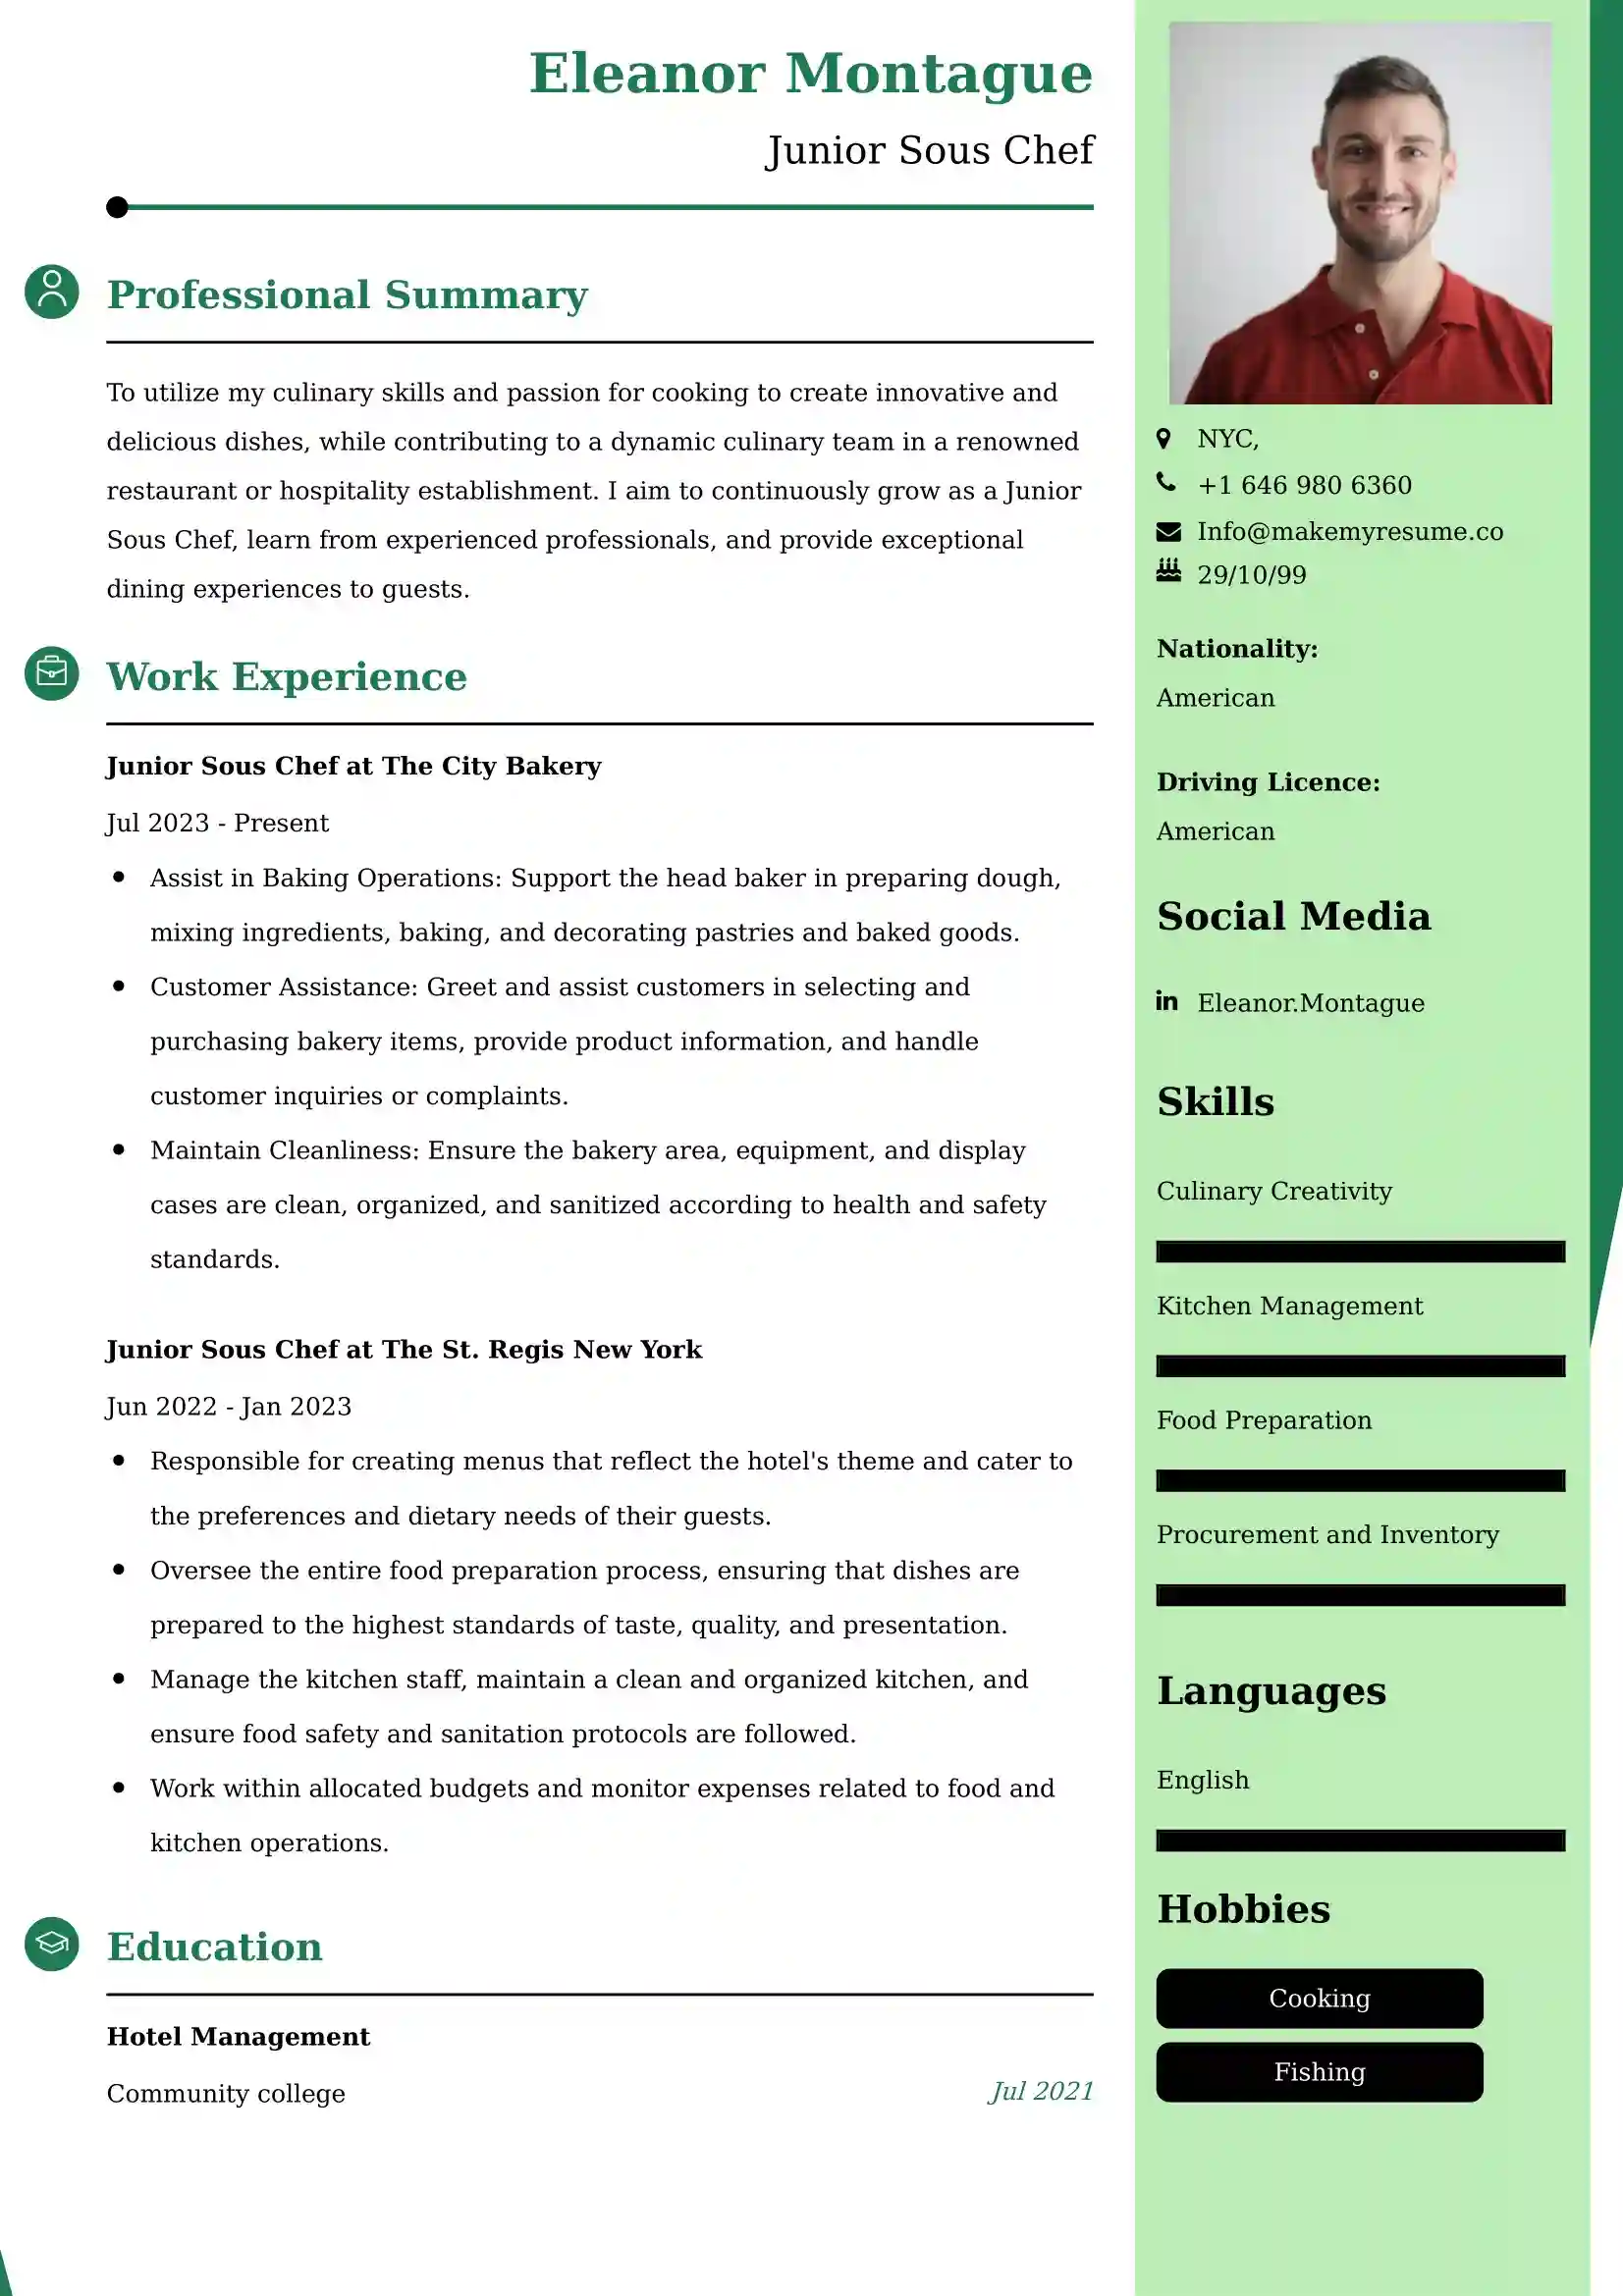 Junior Sous Chef Resume Examples - Australian Format and Tips